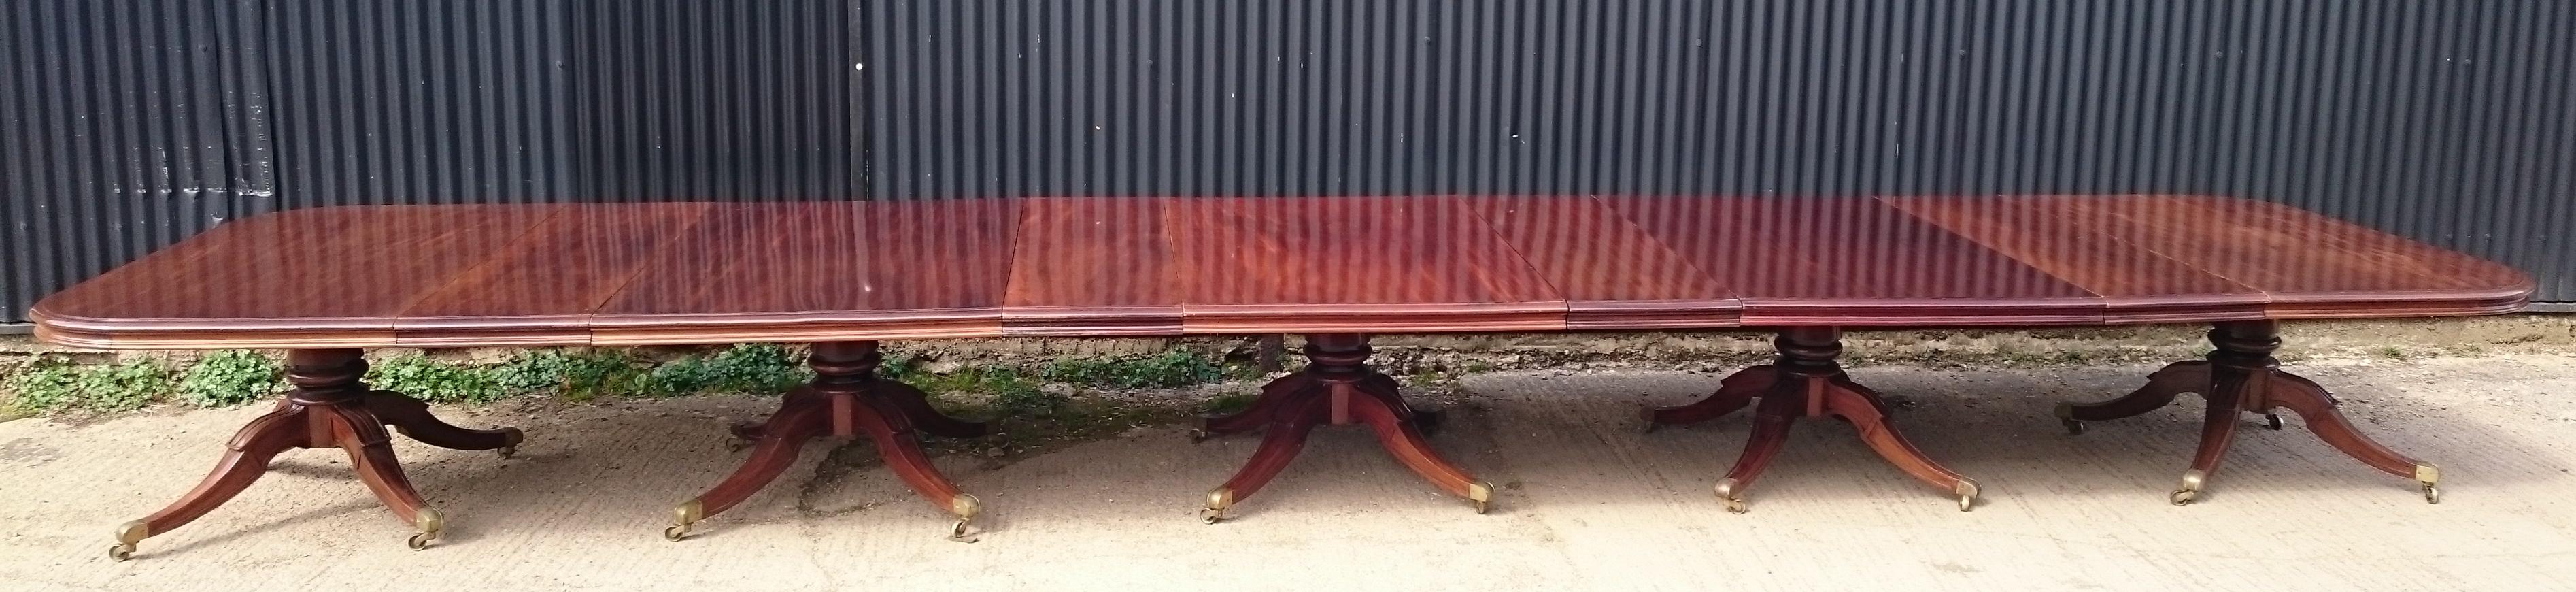 Very large and important Regency mahogany five pedestal antique dining table. This dining table is an impressive scale, standing on five pedestals each with four splay legs. The edge has double thickness molding all the way around, including on the